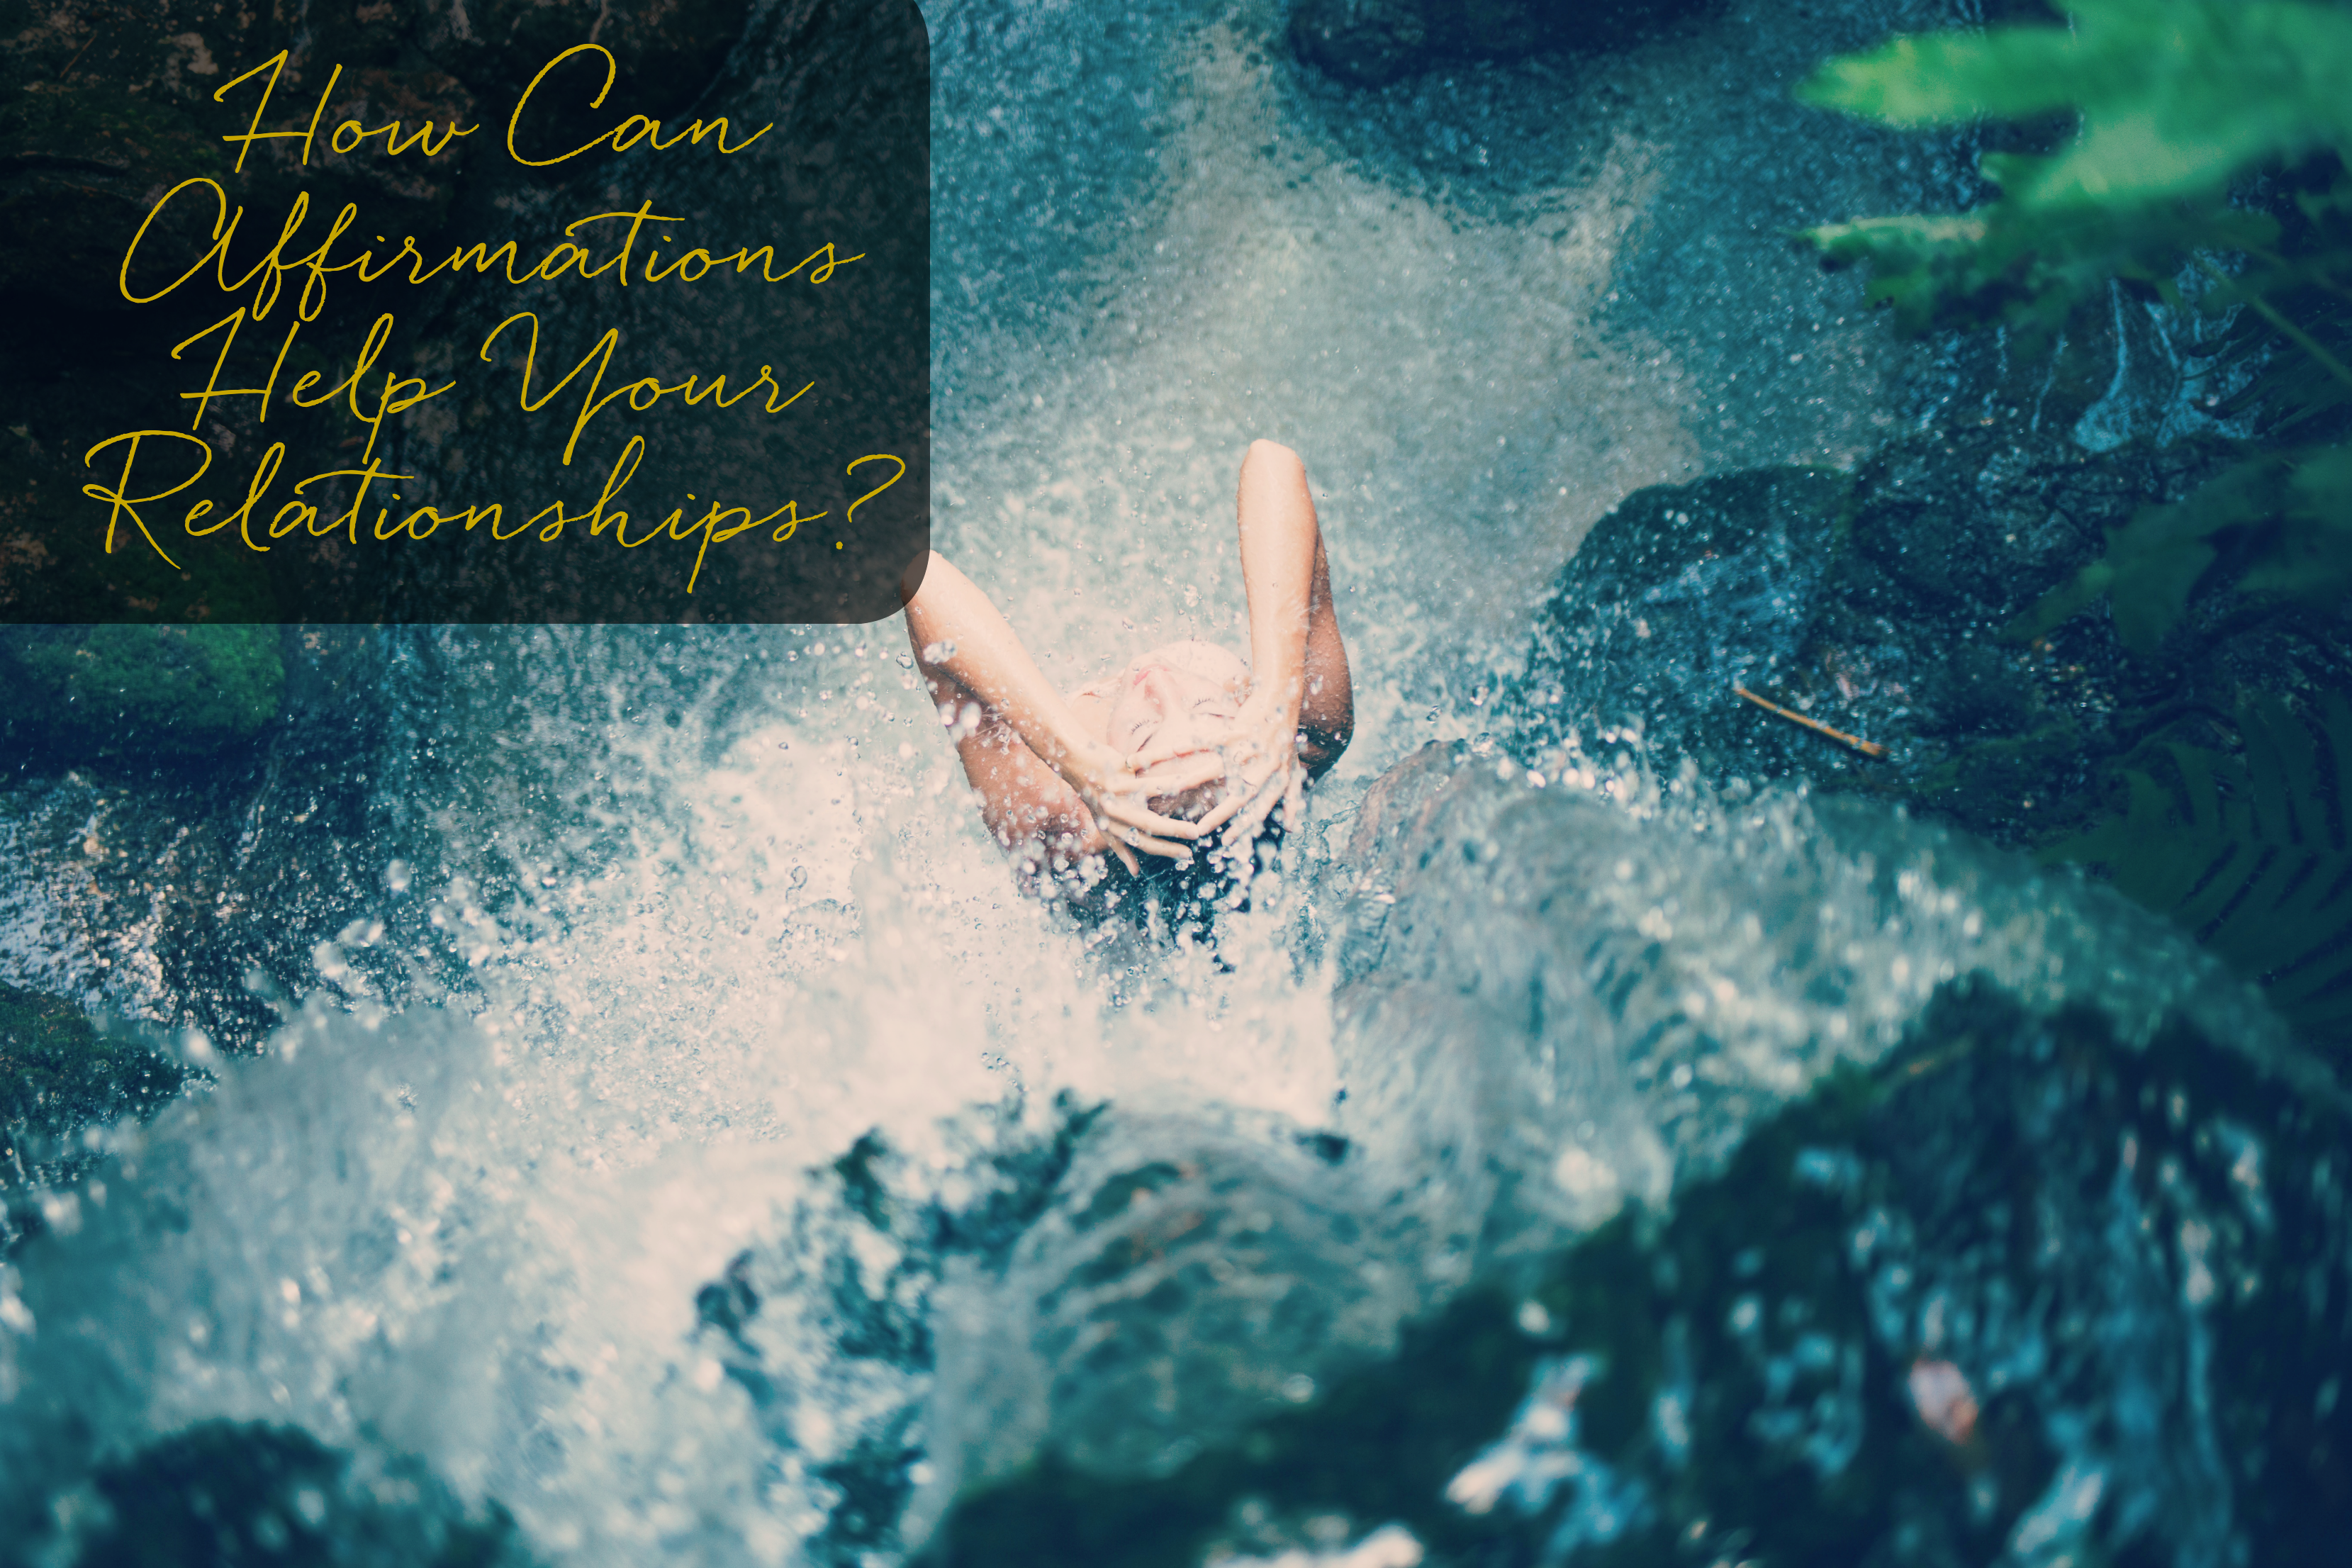 How Can Affirmations Help Your Relationship?